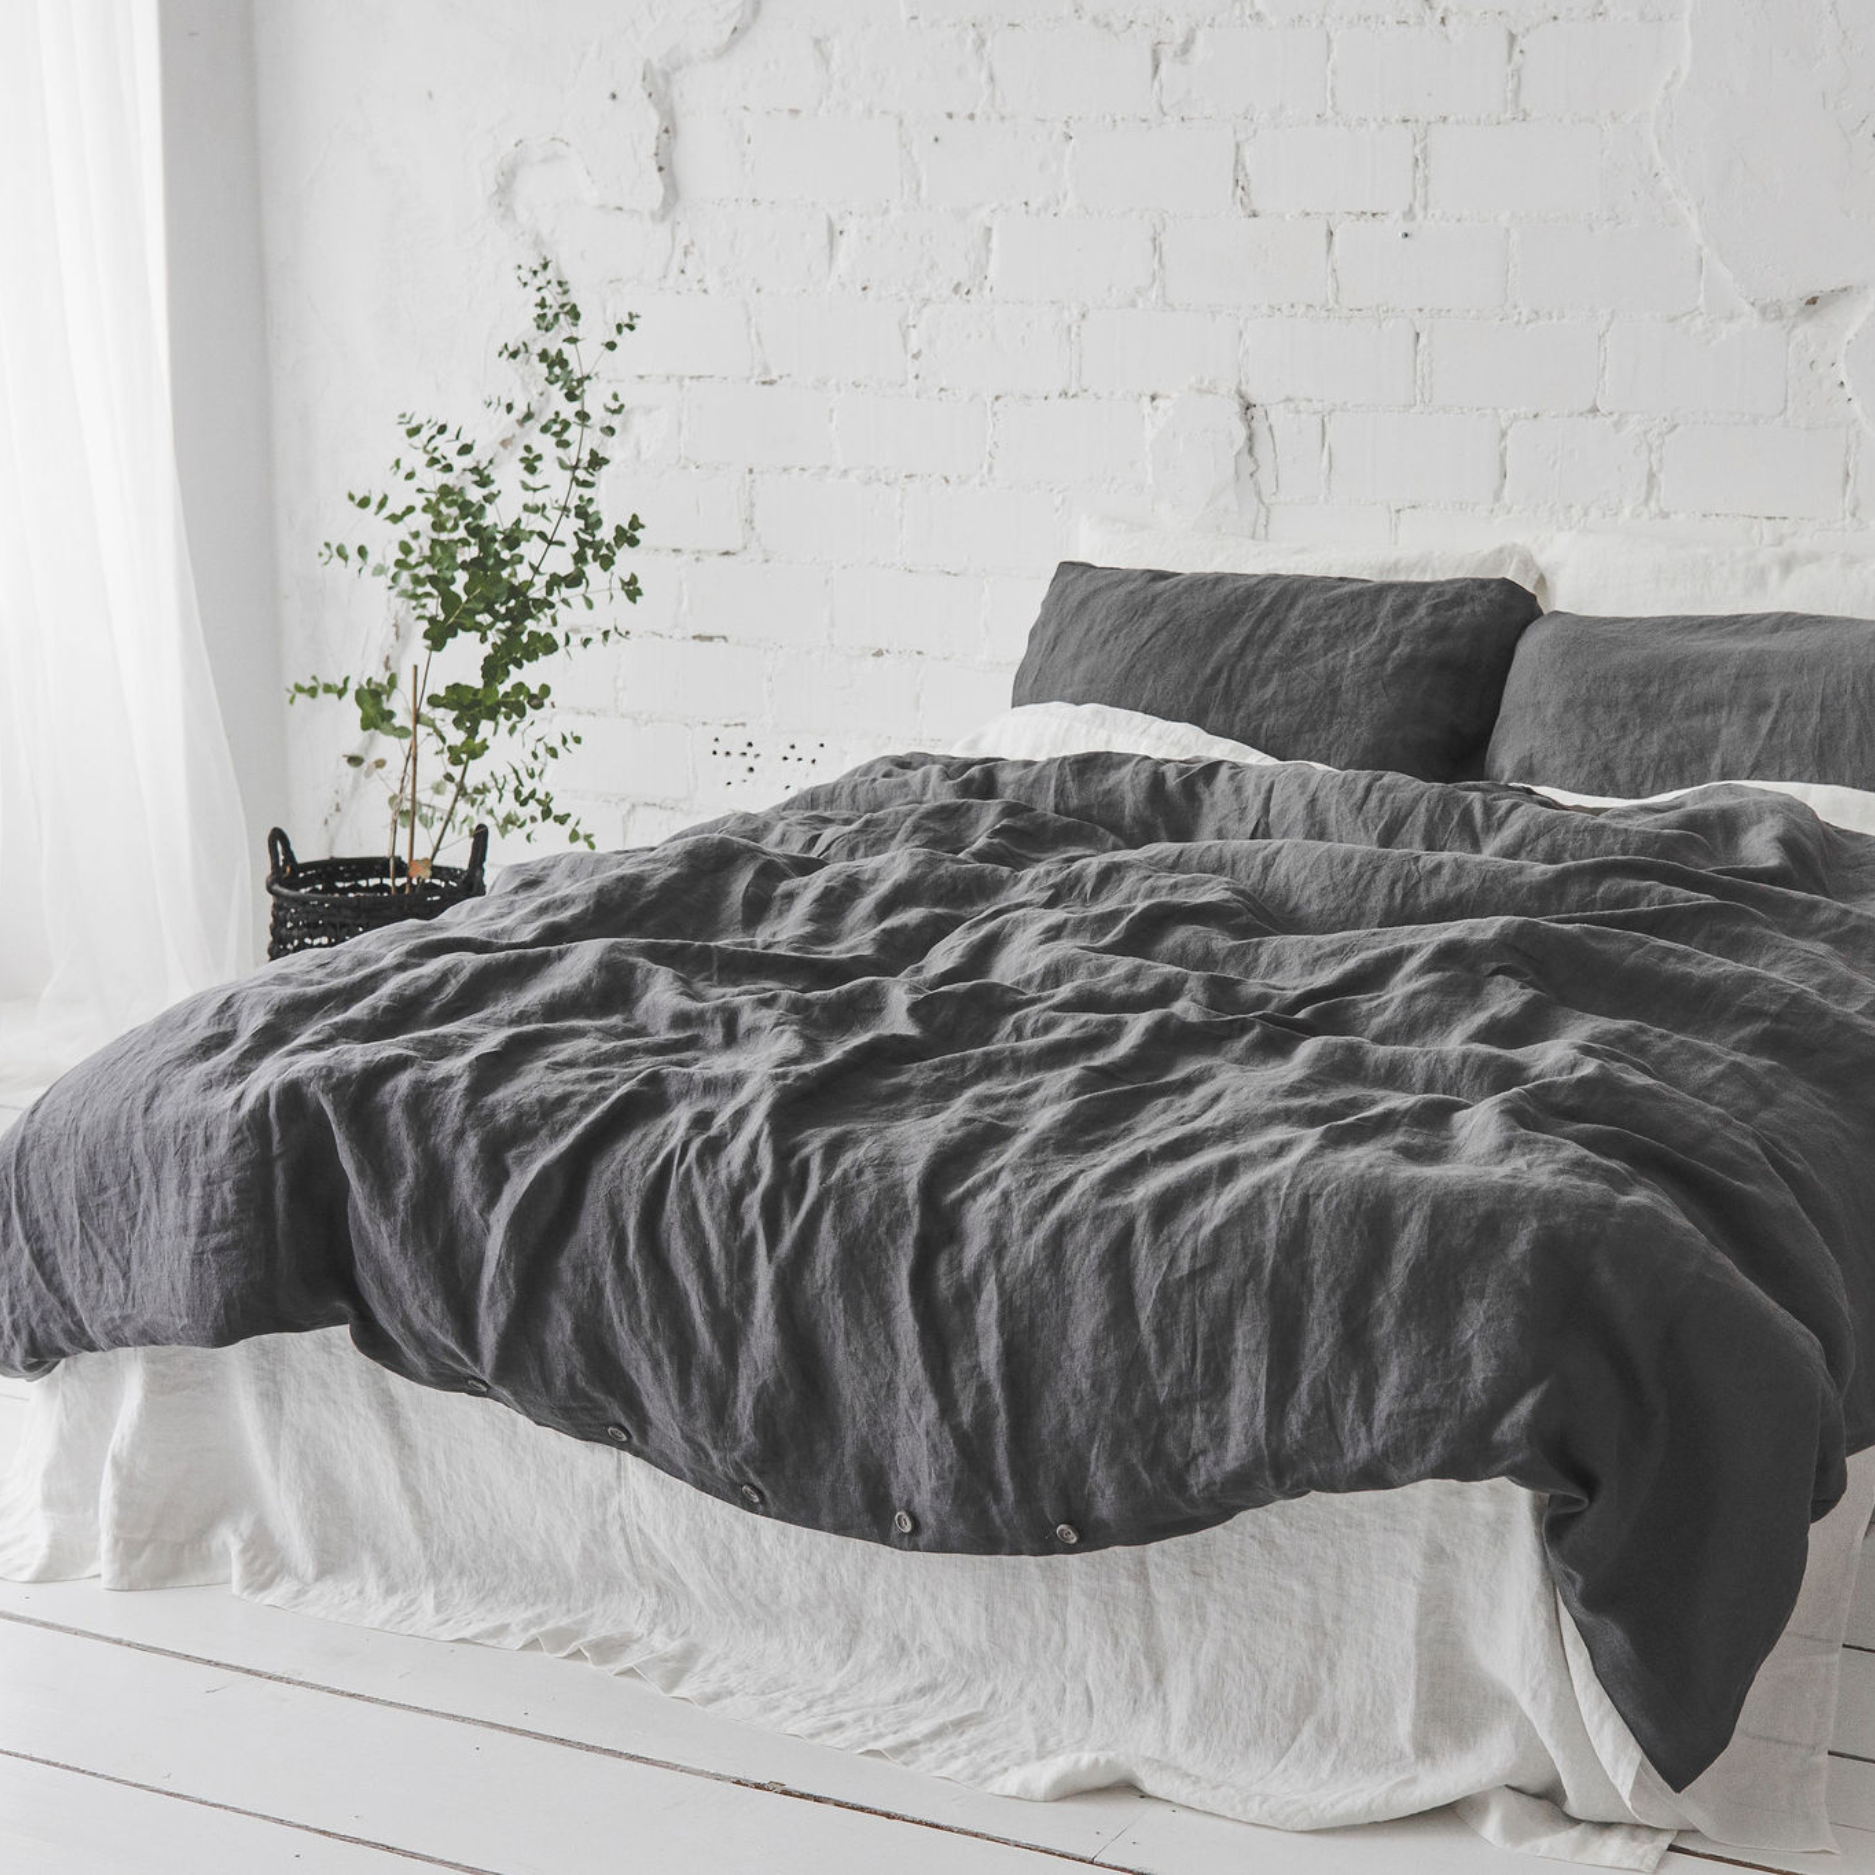 A made up bed with a dark gray liinen cover with a white flat sheet in a white room.